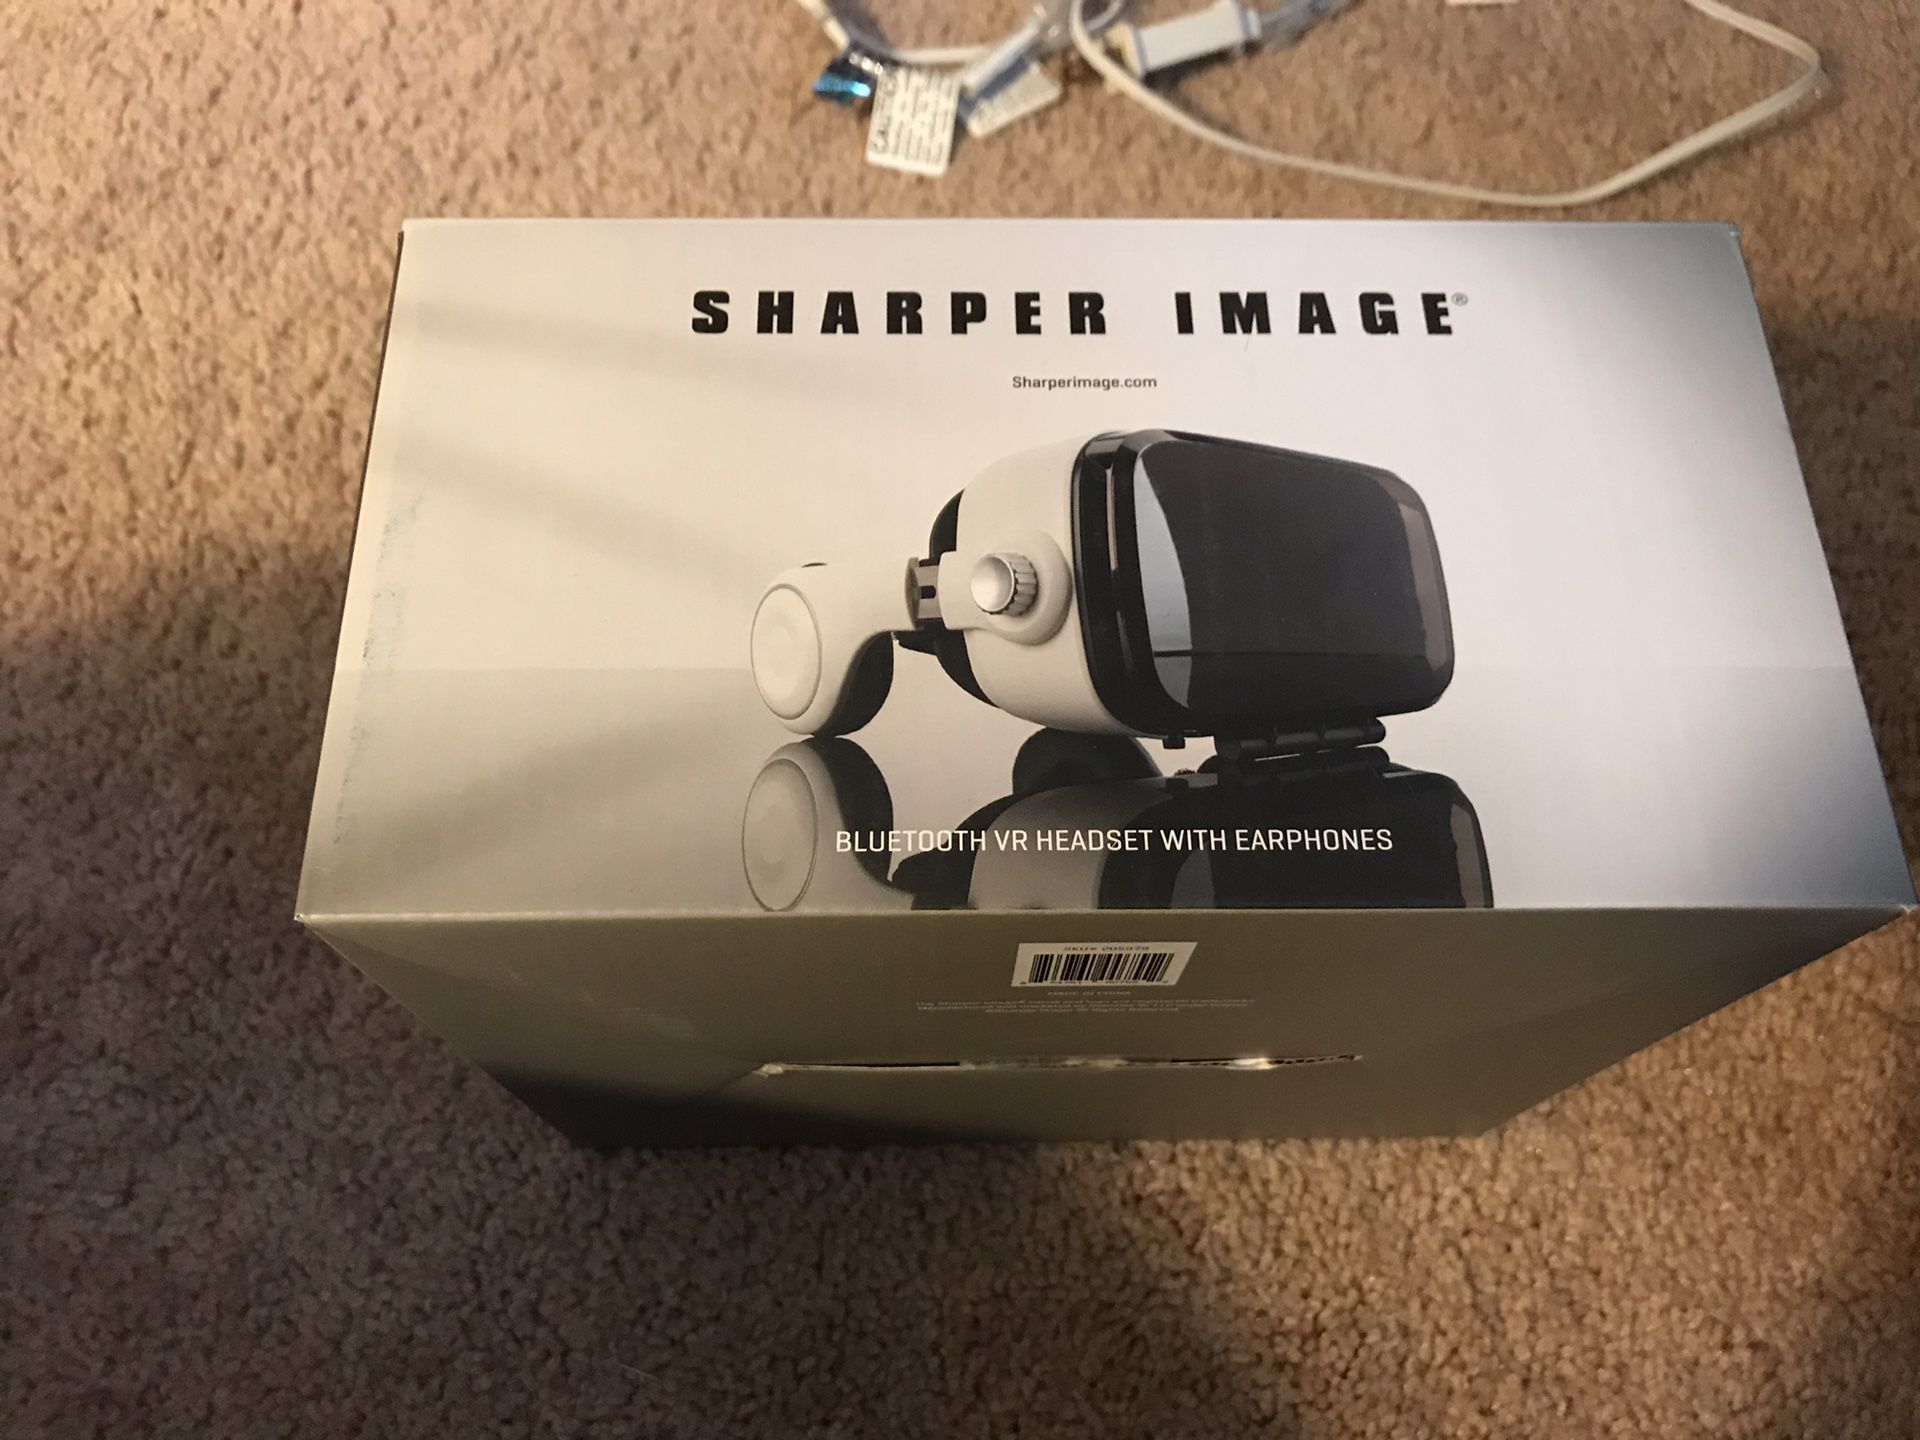 Sharper image VR Bluetooth headset with earphones